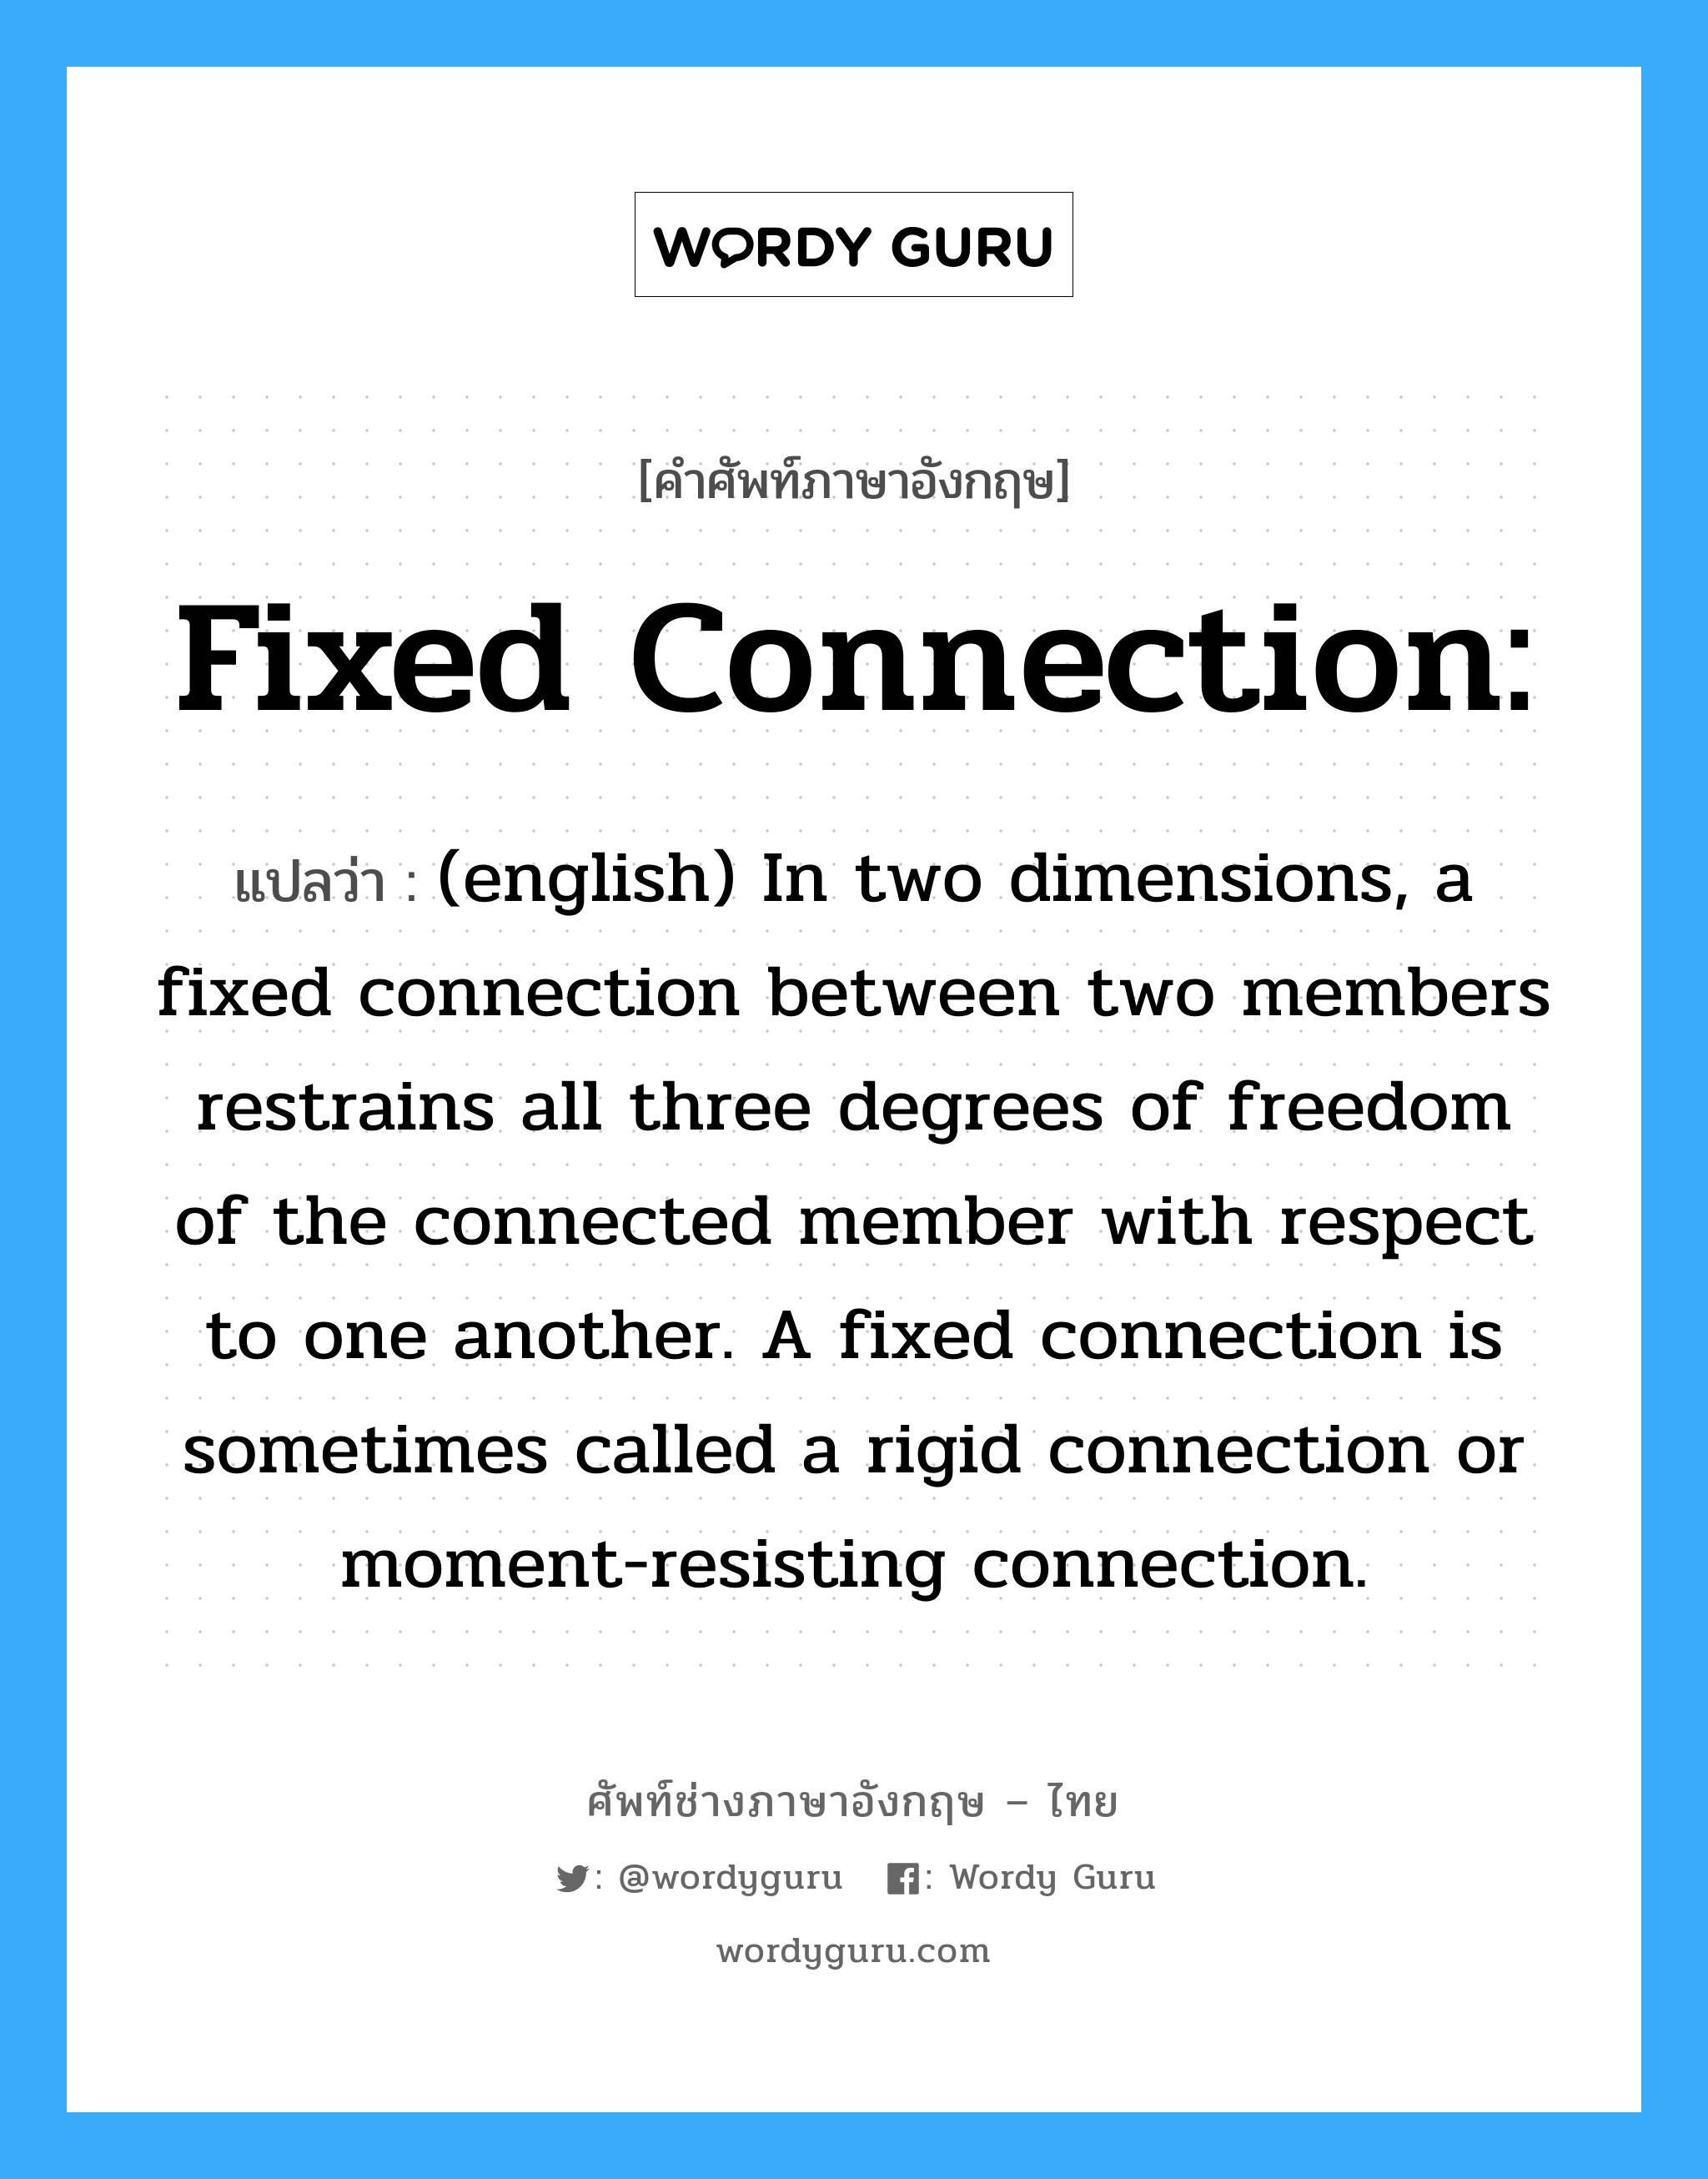 (english) In two dimensions, a fixed connection between two members restrains all three degrees of freedom of the connected member with respect to one another. A fixed connection is sometimes called a rigid connection or moment-resisting connection. ภาษาอังกฤษ?, คำศัพท์ช่างภาษาอังกฤษ - ไทย (english) In two dimensions, a fixed connection between two members restrains all three degrees of freedom of the connected member with respect to one another. A fixed connection is sometimes called a rigid connection or moment-resisting connection. คำศัพท์ภาษาอังกฤษ (english) In two dimensions, a fixed connection between two members restrains all three degrees of freedom of the connected member with respect to one another. A fixed connection is sometimes called a rigid connection or moment-resisting connection. แปลว่า Fixed connection: